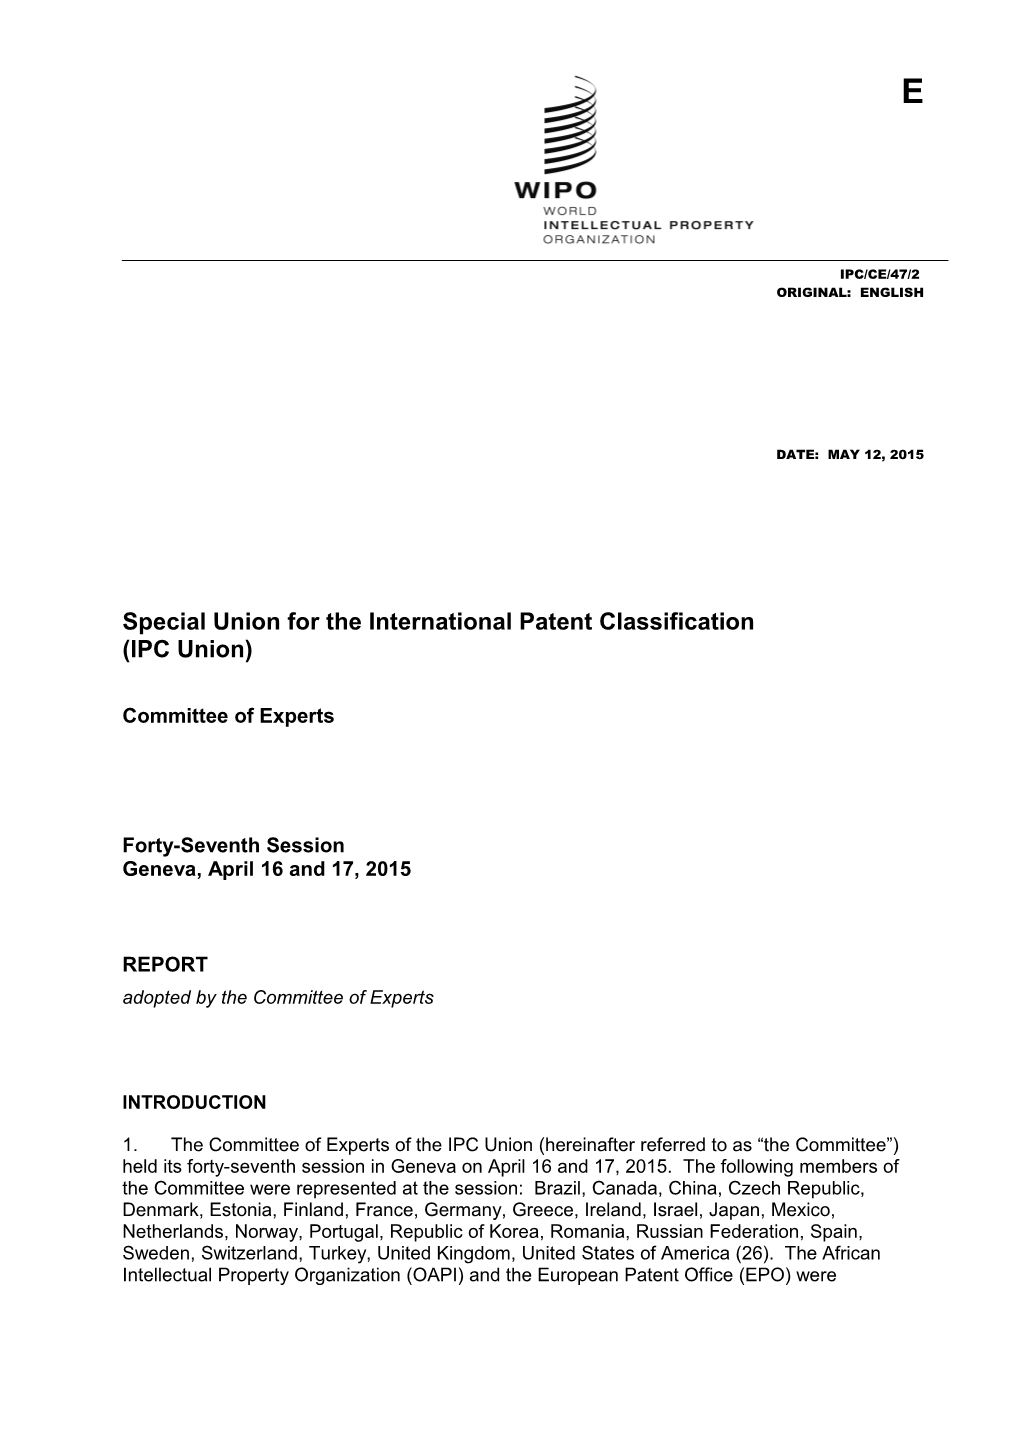 Document IPC/CE/47/2, Report, 47Th Session, IPC Committee of Experts